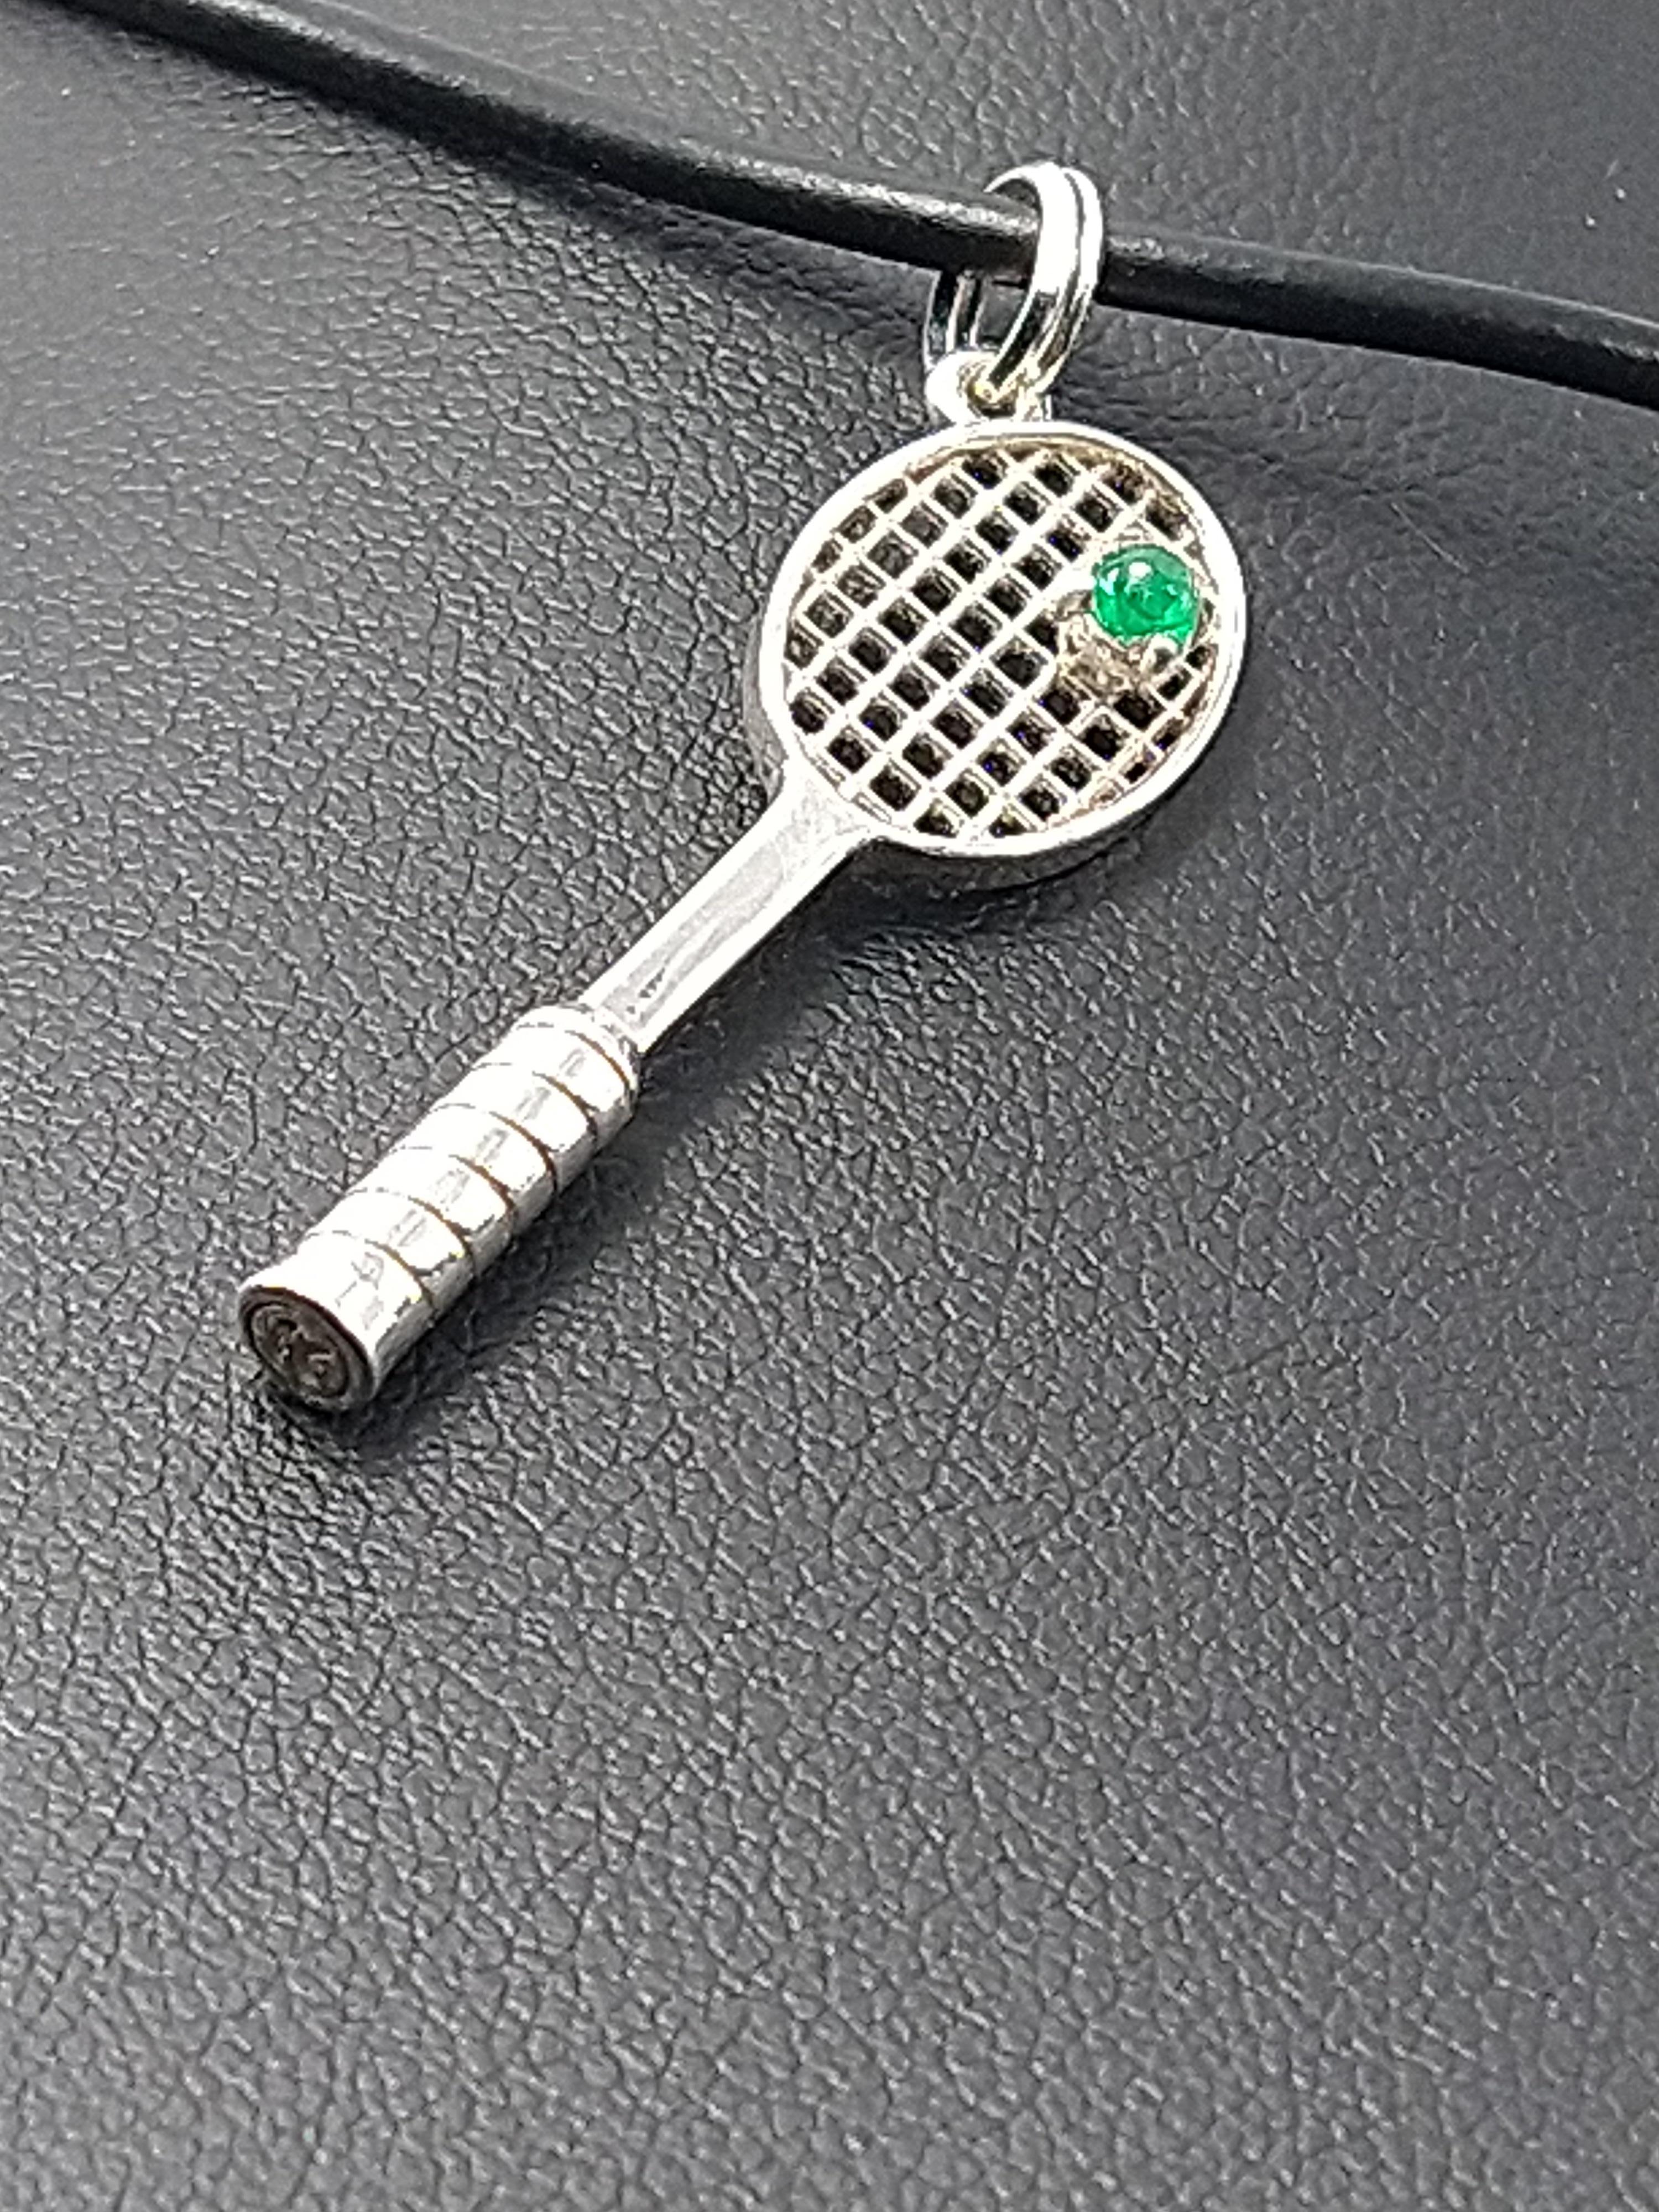  Tennis Racket Pendant, Tiffany designer, Thomas Kurilla could not resist.  
 Love, set, match!  I just made this for myself , because pendants work for me!  {I need a secret weapon.}  Get back into the swing of things before it's too late..   Gift